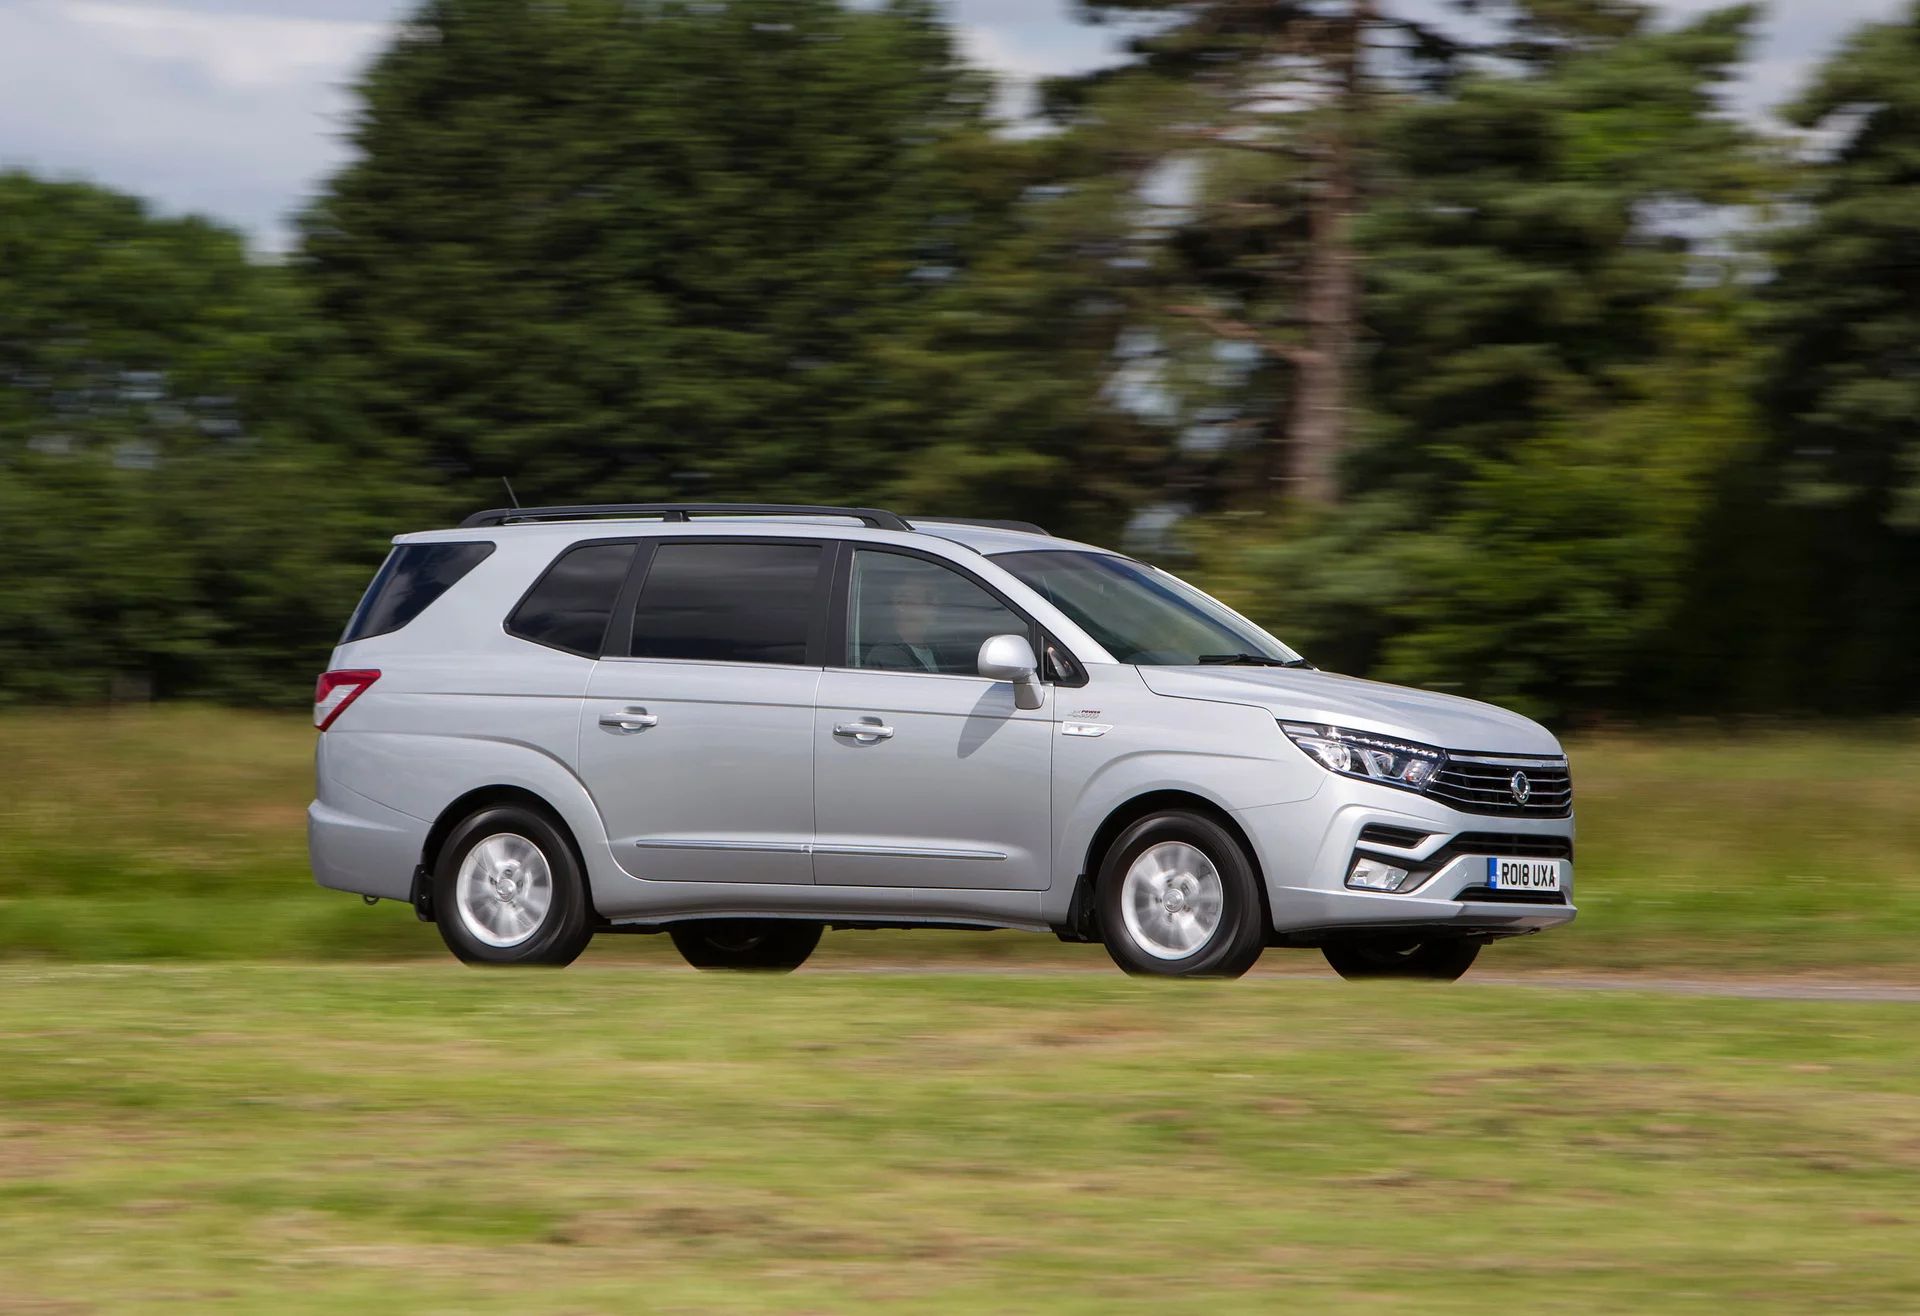 Restyled SsangYong Turismo in the serial view